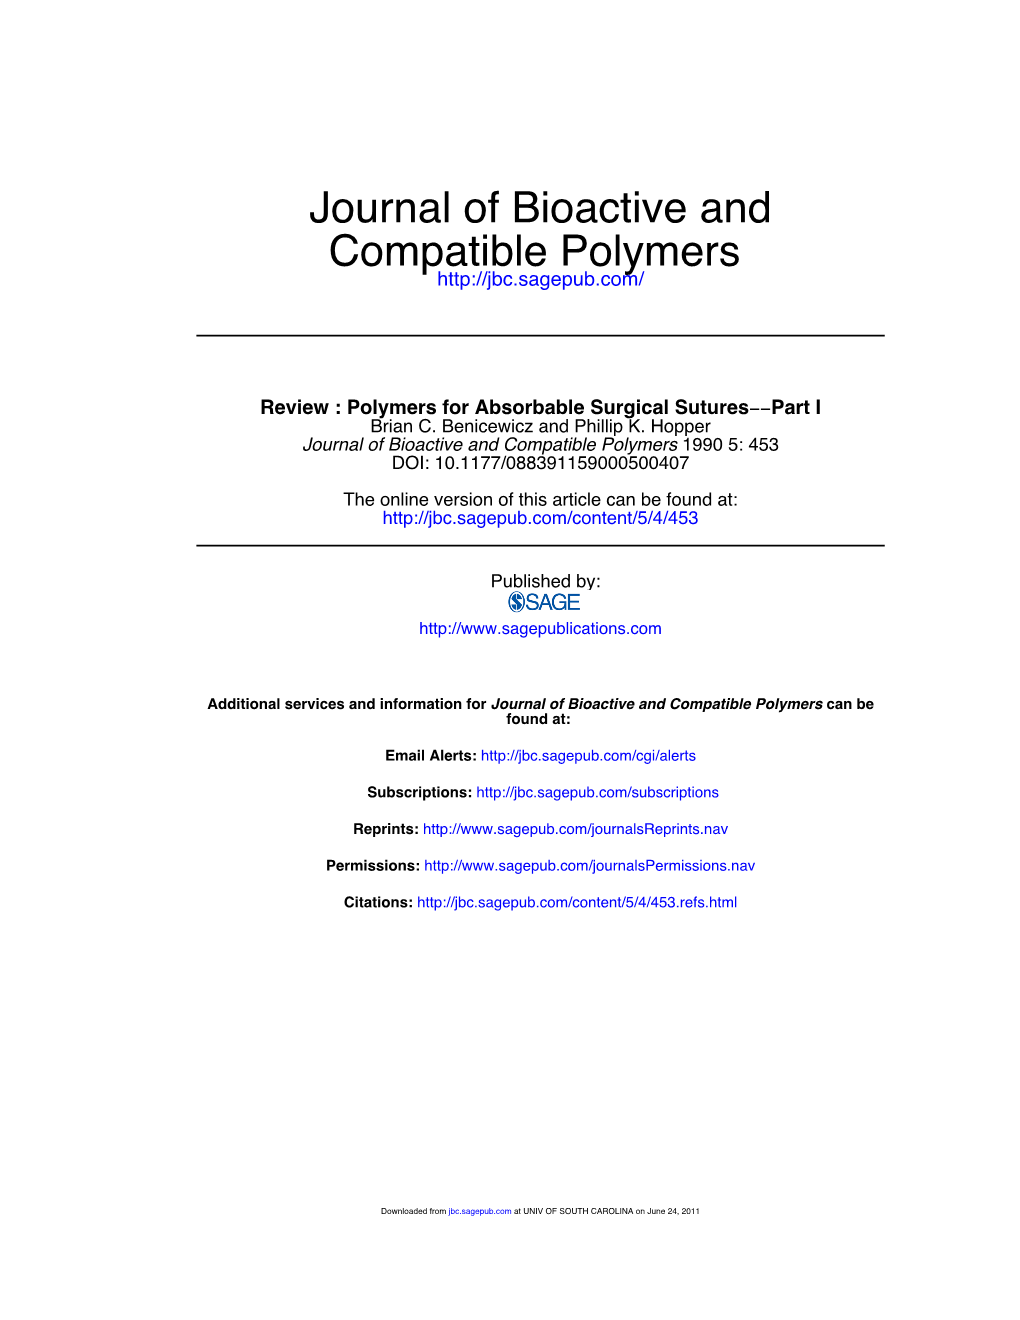 Compatible Polymers Journal of Bioactive